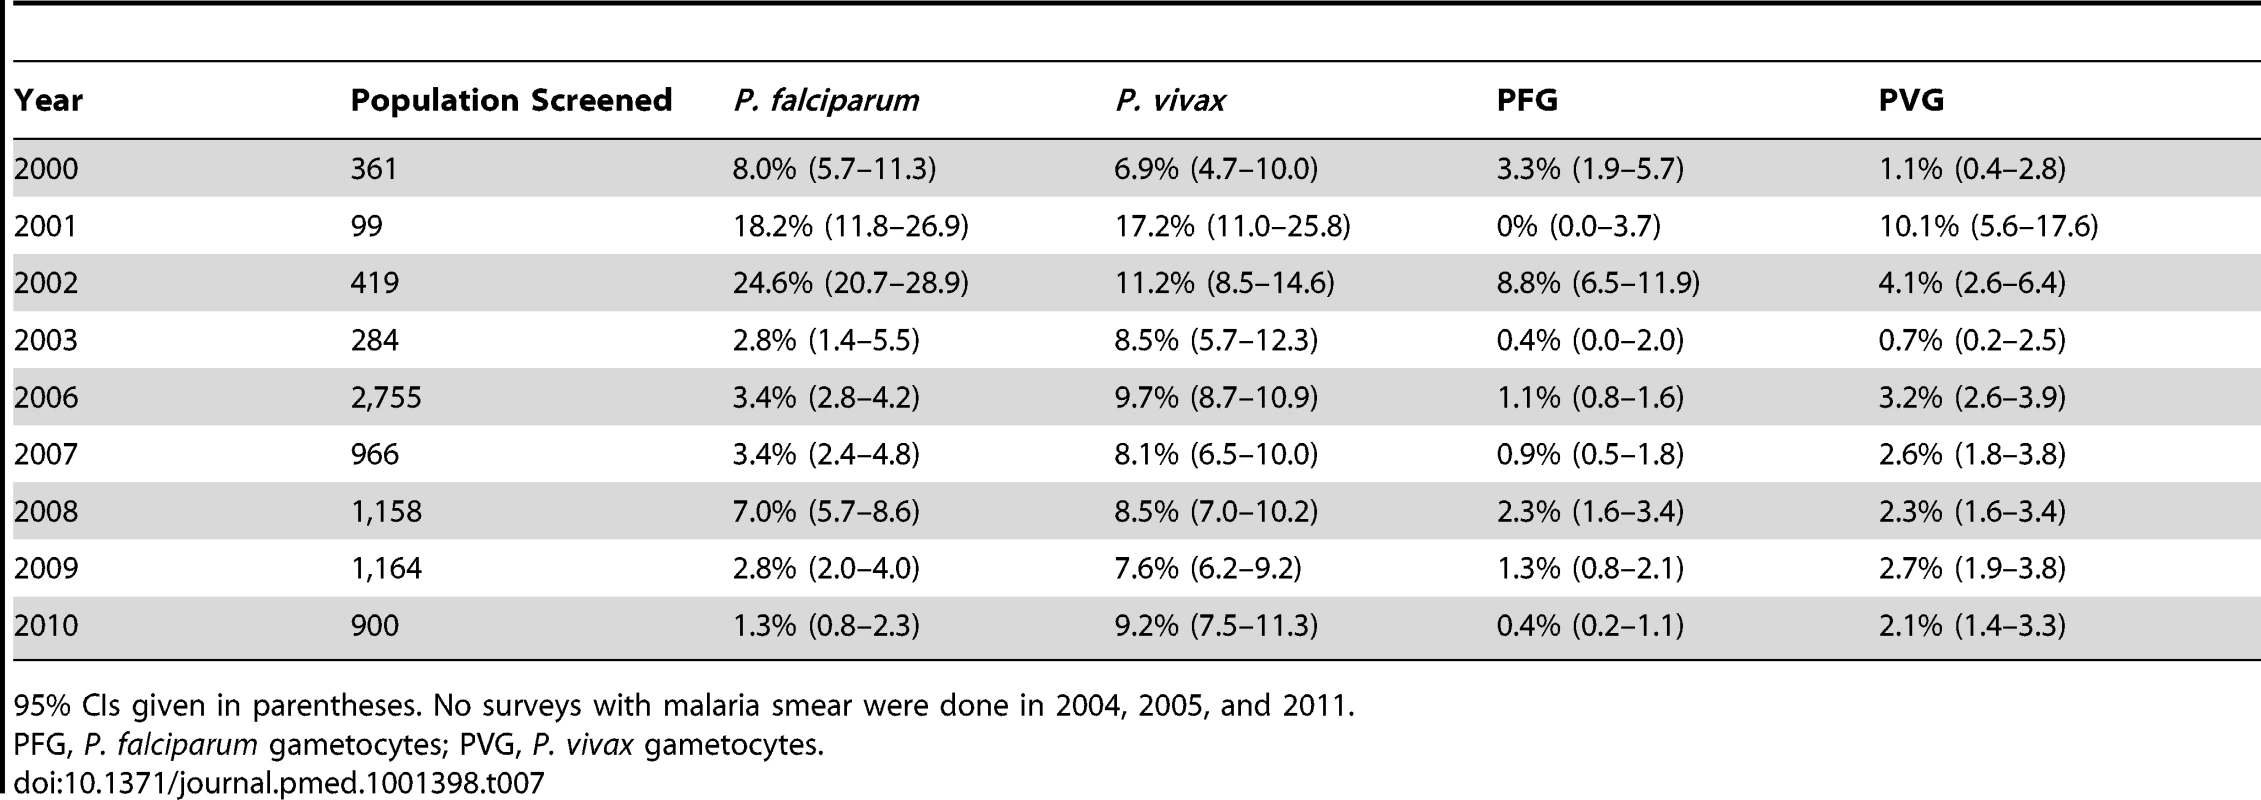 Prevalence of <i>P. falciparum</i> and <i>P. vivax</i> infection and of gametocyte carriage during surveys of Myanmar villages within SMRU clinics and health posts catchment area.